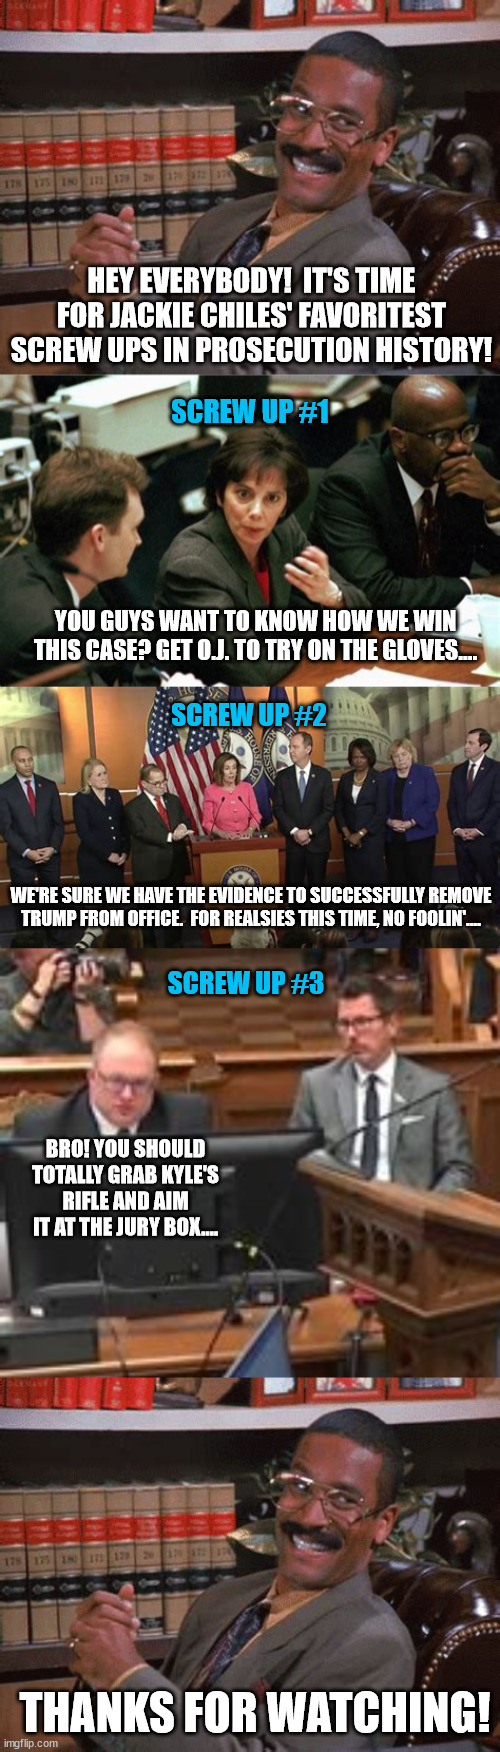 Epic legal fails | HEY EVERYBODY!  IT'S TIME FOR JACKIE CHILES' FAVORITEST SCREW UPS IN PROSECUTION HISTORY! SCREW UP #1; YOU GUYS WANT TO KNOW HOW WE WIN THIS CASE? GET O.J. TO TRY ON THE GLOVES.... SCREW UP #2; WE'RE SURE WE HAVE THE EVIDENCE TO SUCCESSFULLY REMOVE TRUMP FROM OFFICE.  FOR REALSIES THIS TIME, NO FOOLIN'.... SCREW UP #3; BRO! YOU SHOULD TOTALLY GRAB KYLE'S RIFLE AND AIM IT AT THE JURY BOX.... THANKS FOR WATCHING! | image tagged in political meme,prosecution fails,free kyle rittenhouse,gun safety | made w/ Imgflip meme maker